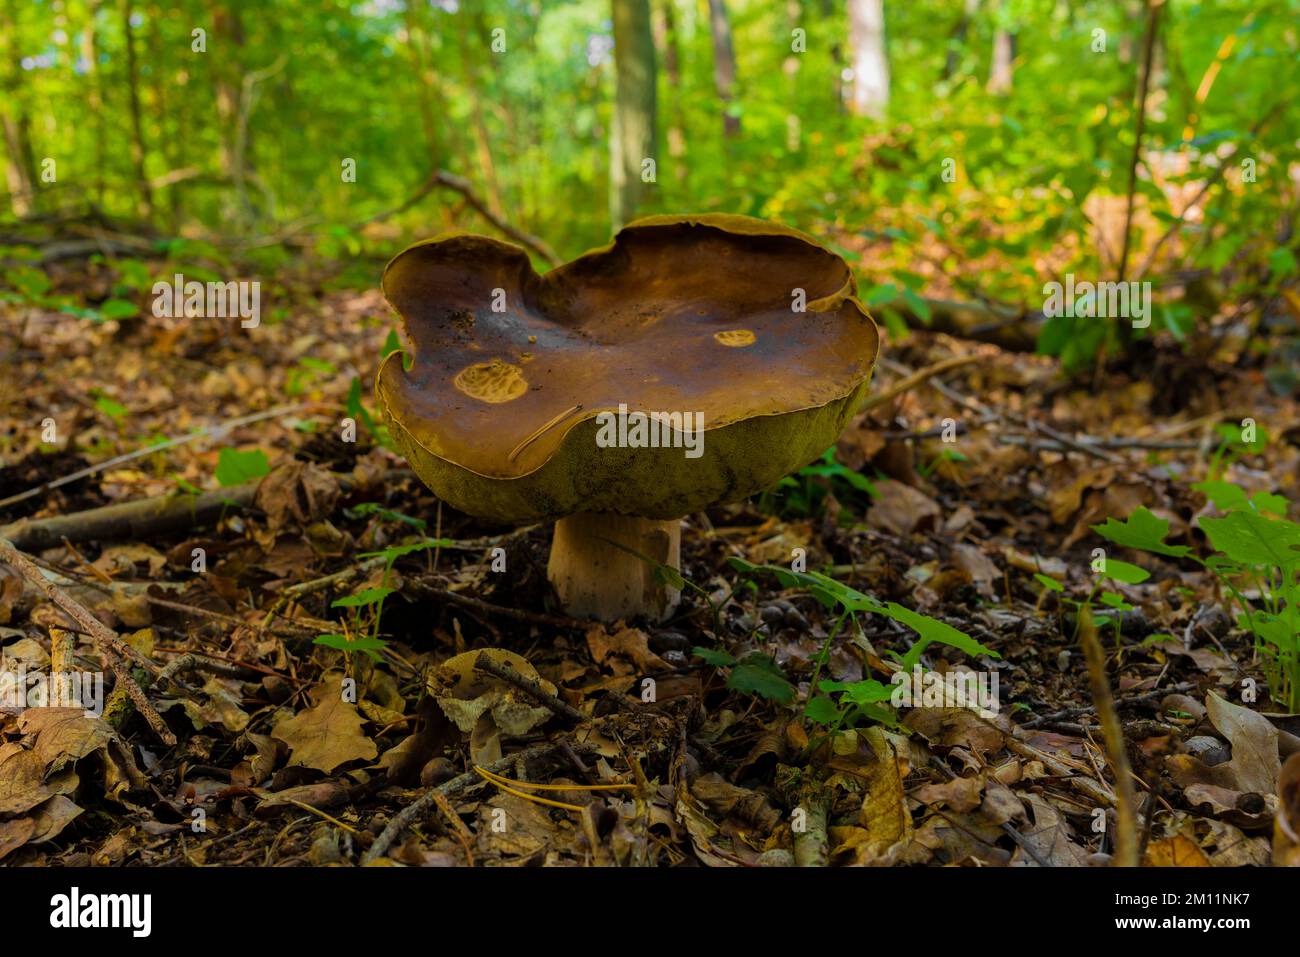 Giant edible chestnut mushroom in autumn in the forest Stock Photo